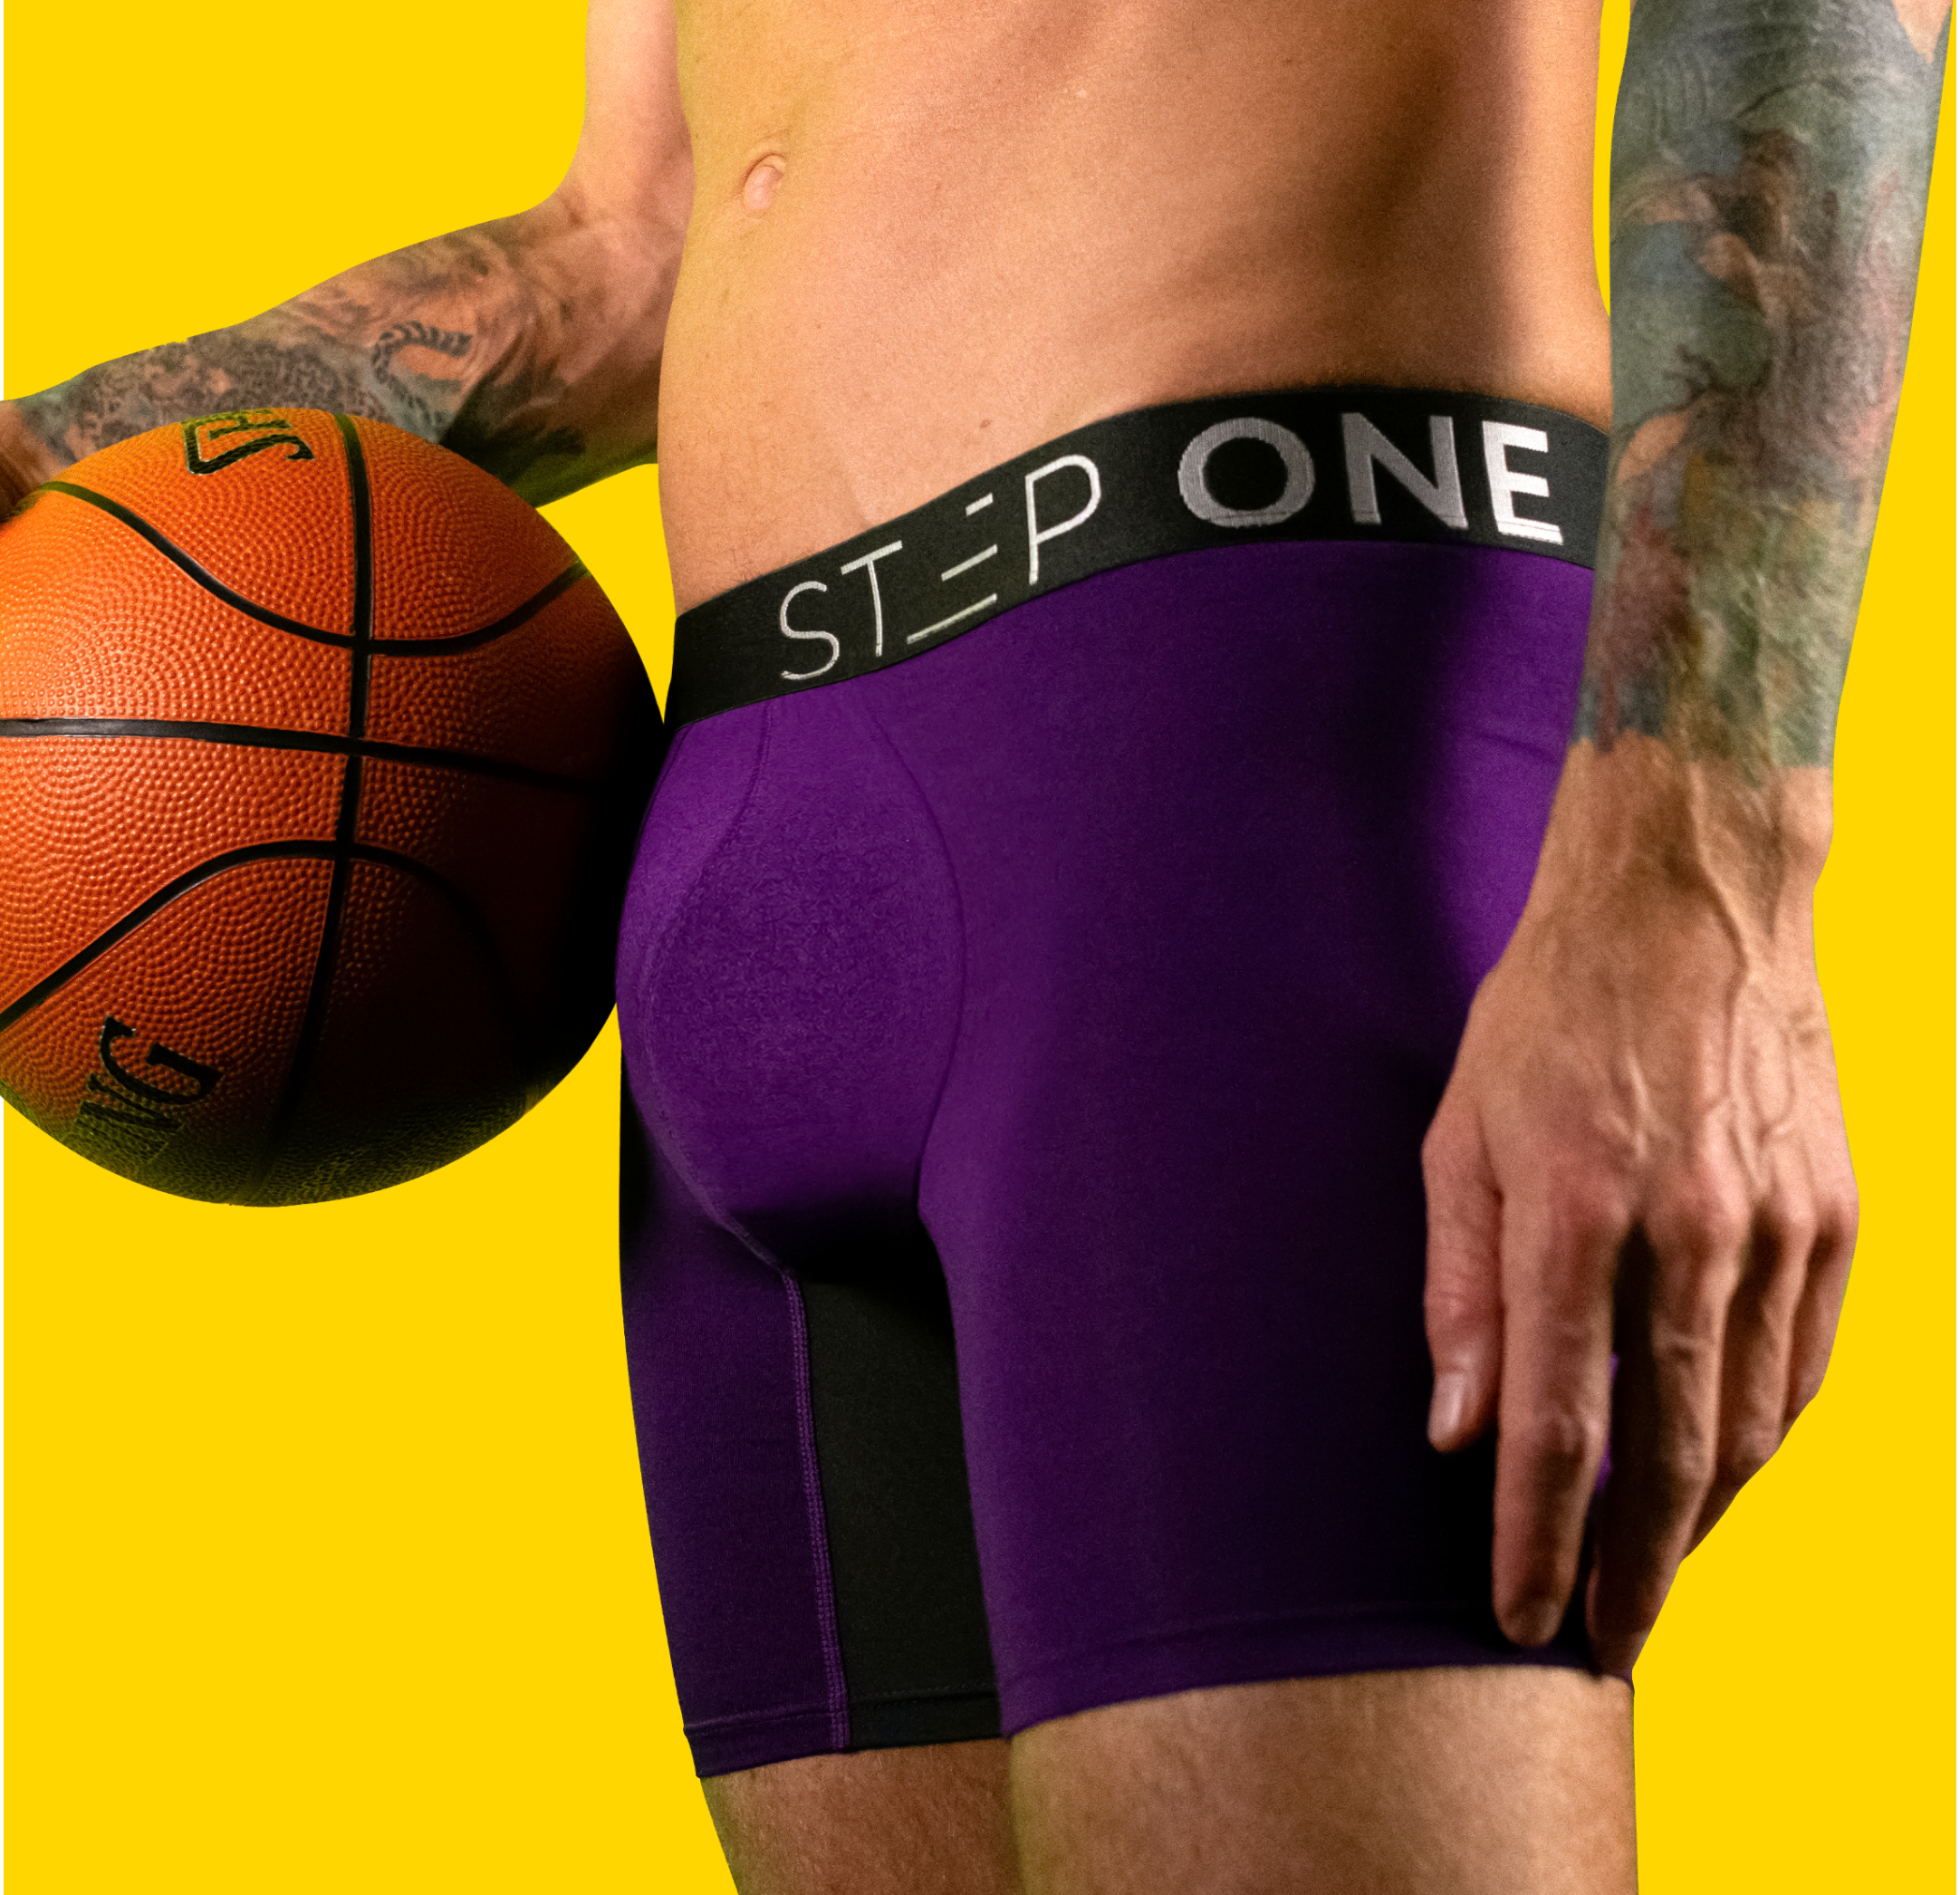 Lukeovision on X: Step one underwear is everything. Black Friday sale  starting today with up to 40% off  Made from  organically grown bamboo + is super soft! My favourite underwear to